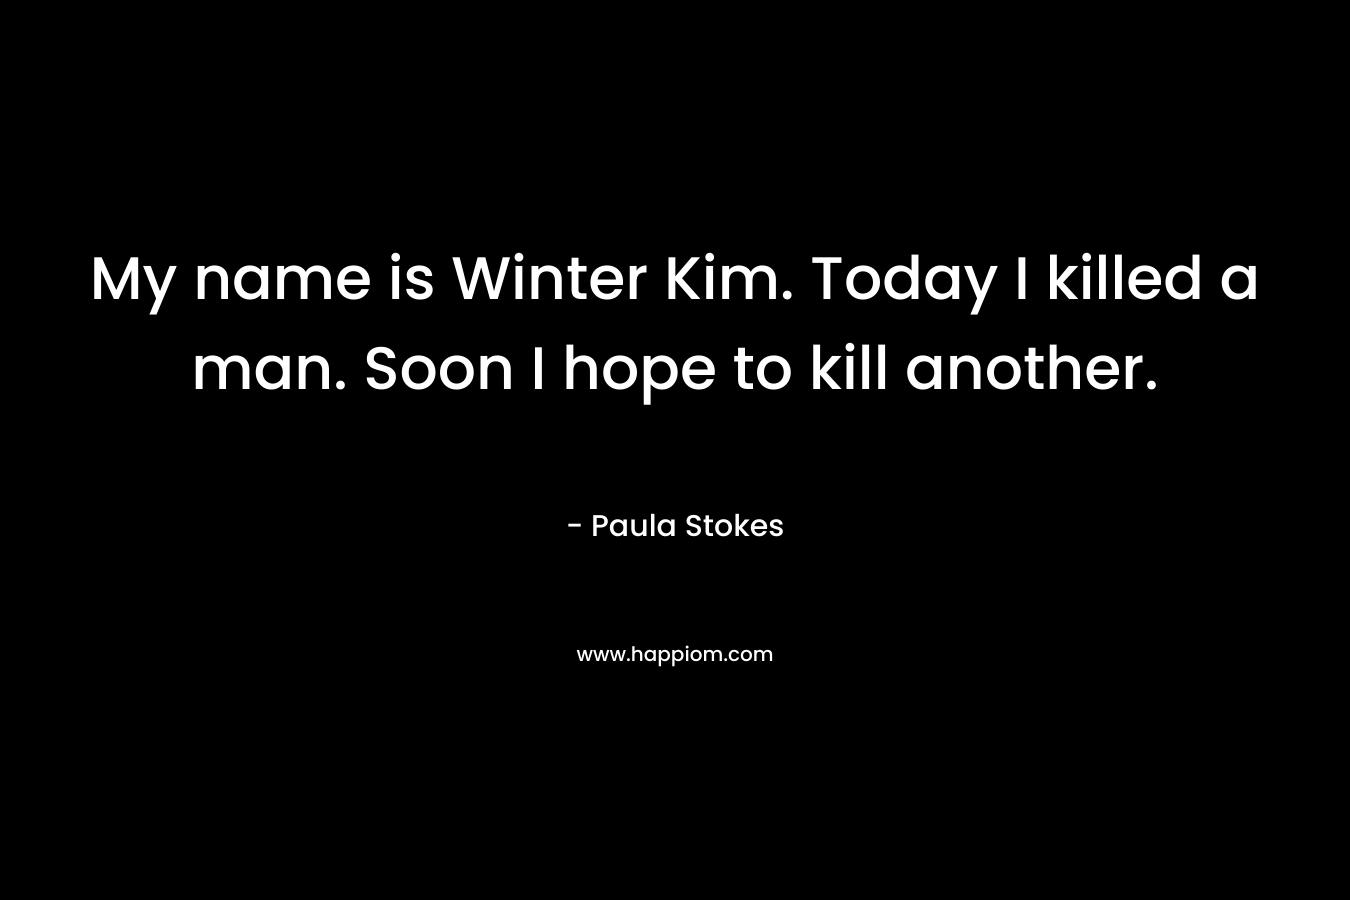 My name is Winter Kim. Today I killed a man. Soon I hope to kill another.